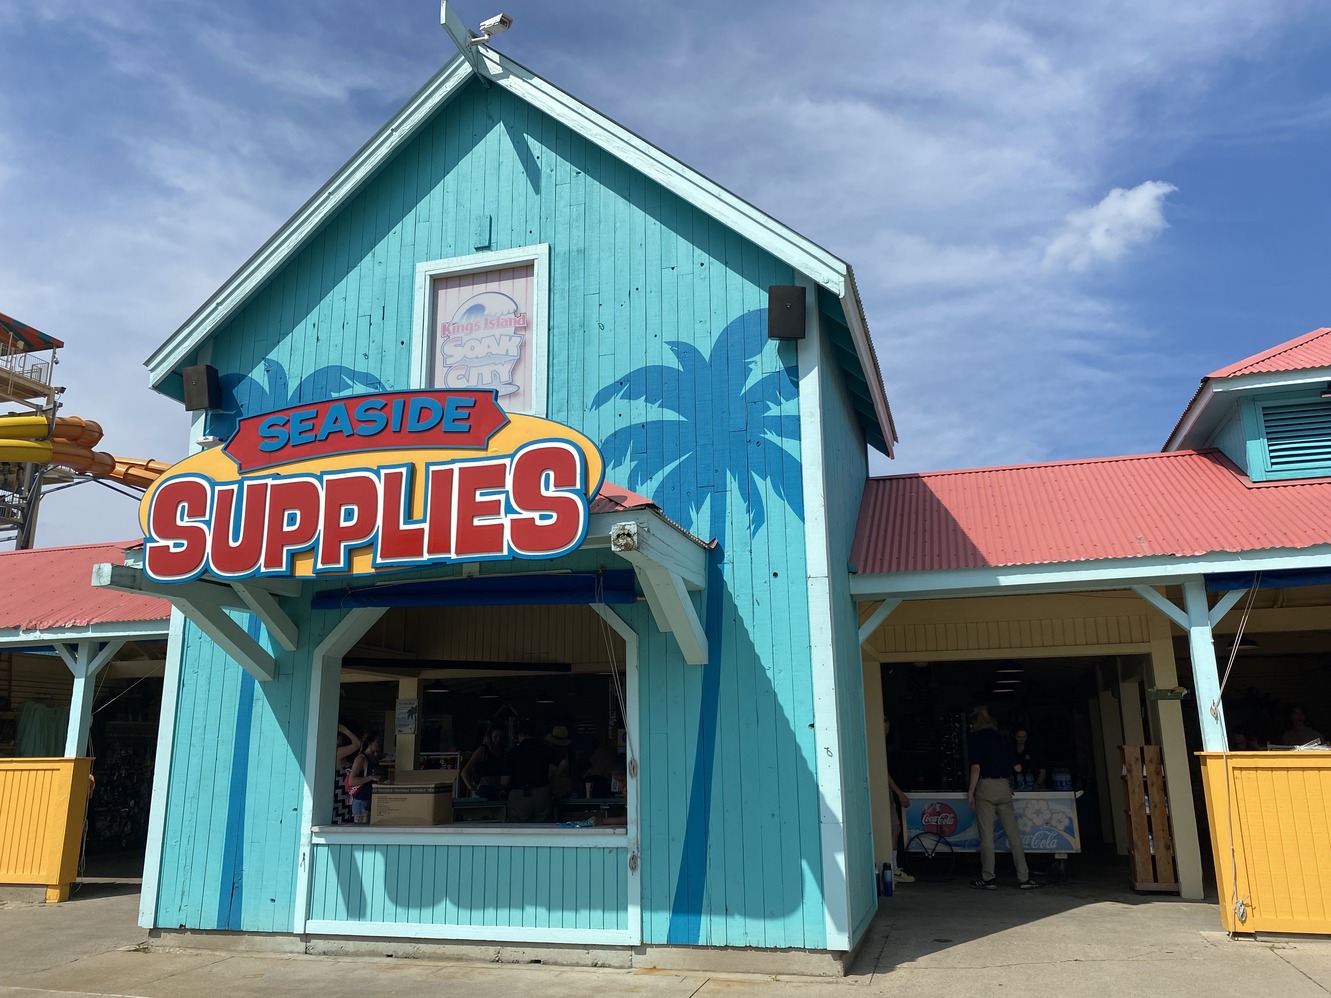 This is the Seaside Supplies knick-knack shack near Breakers
      Bay.